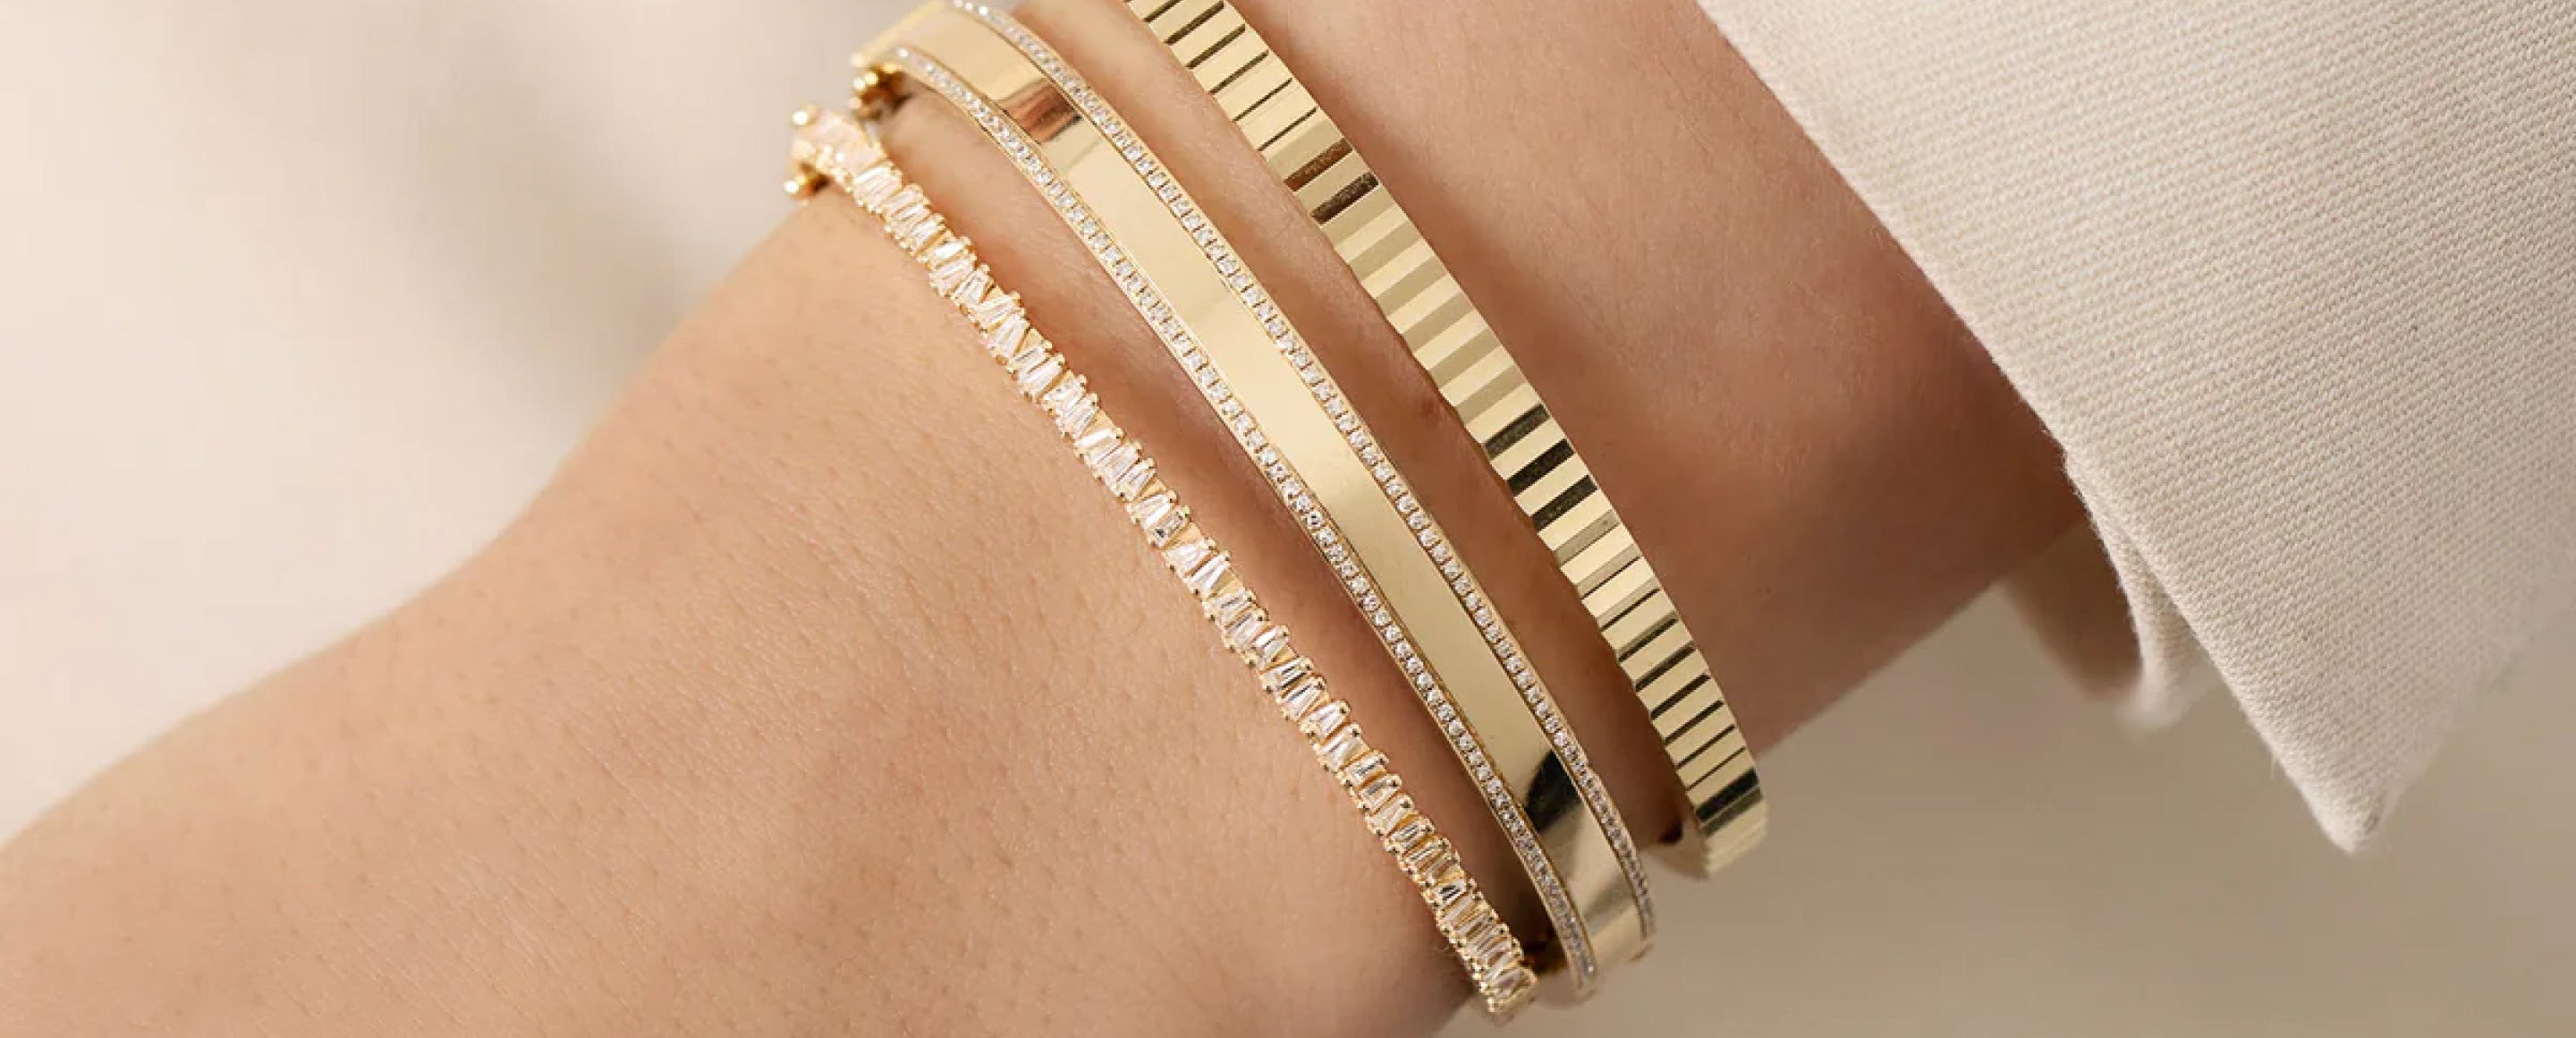 It’s All in the Wrist: How to Style Bangles